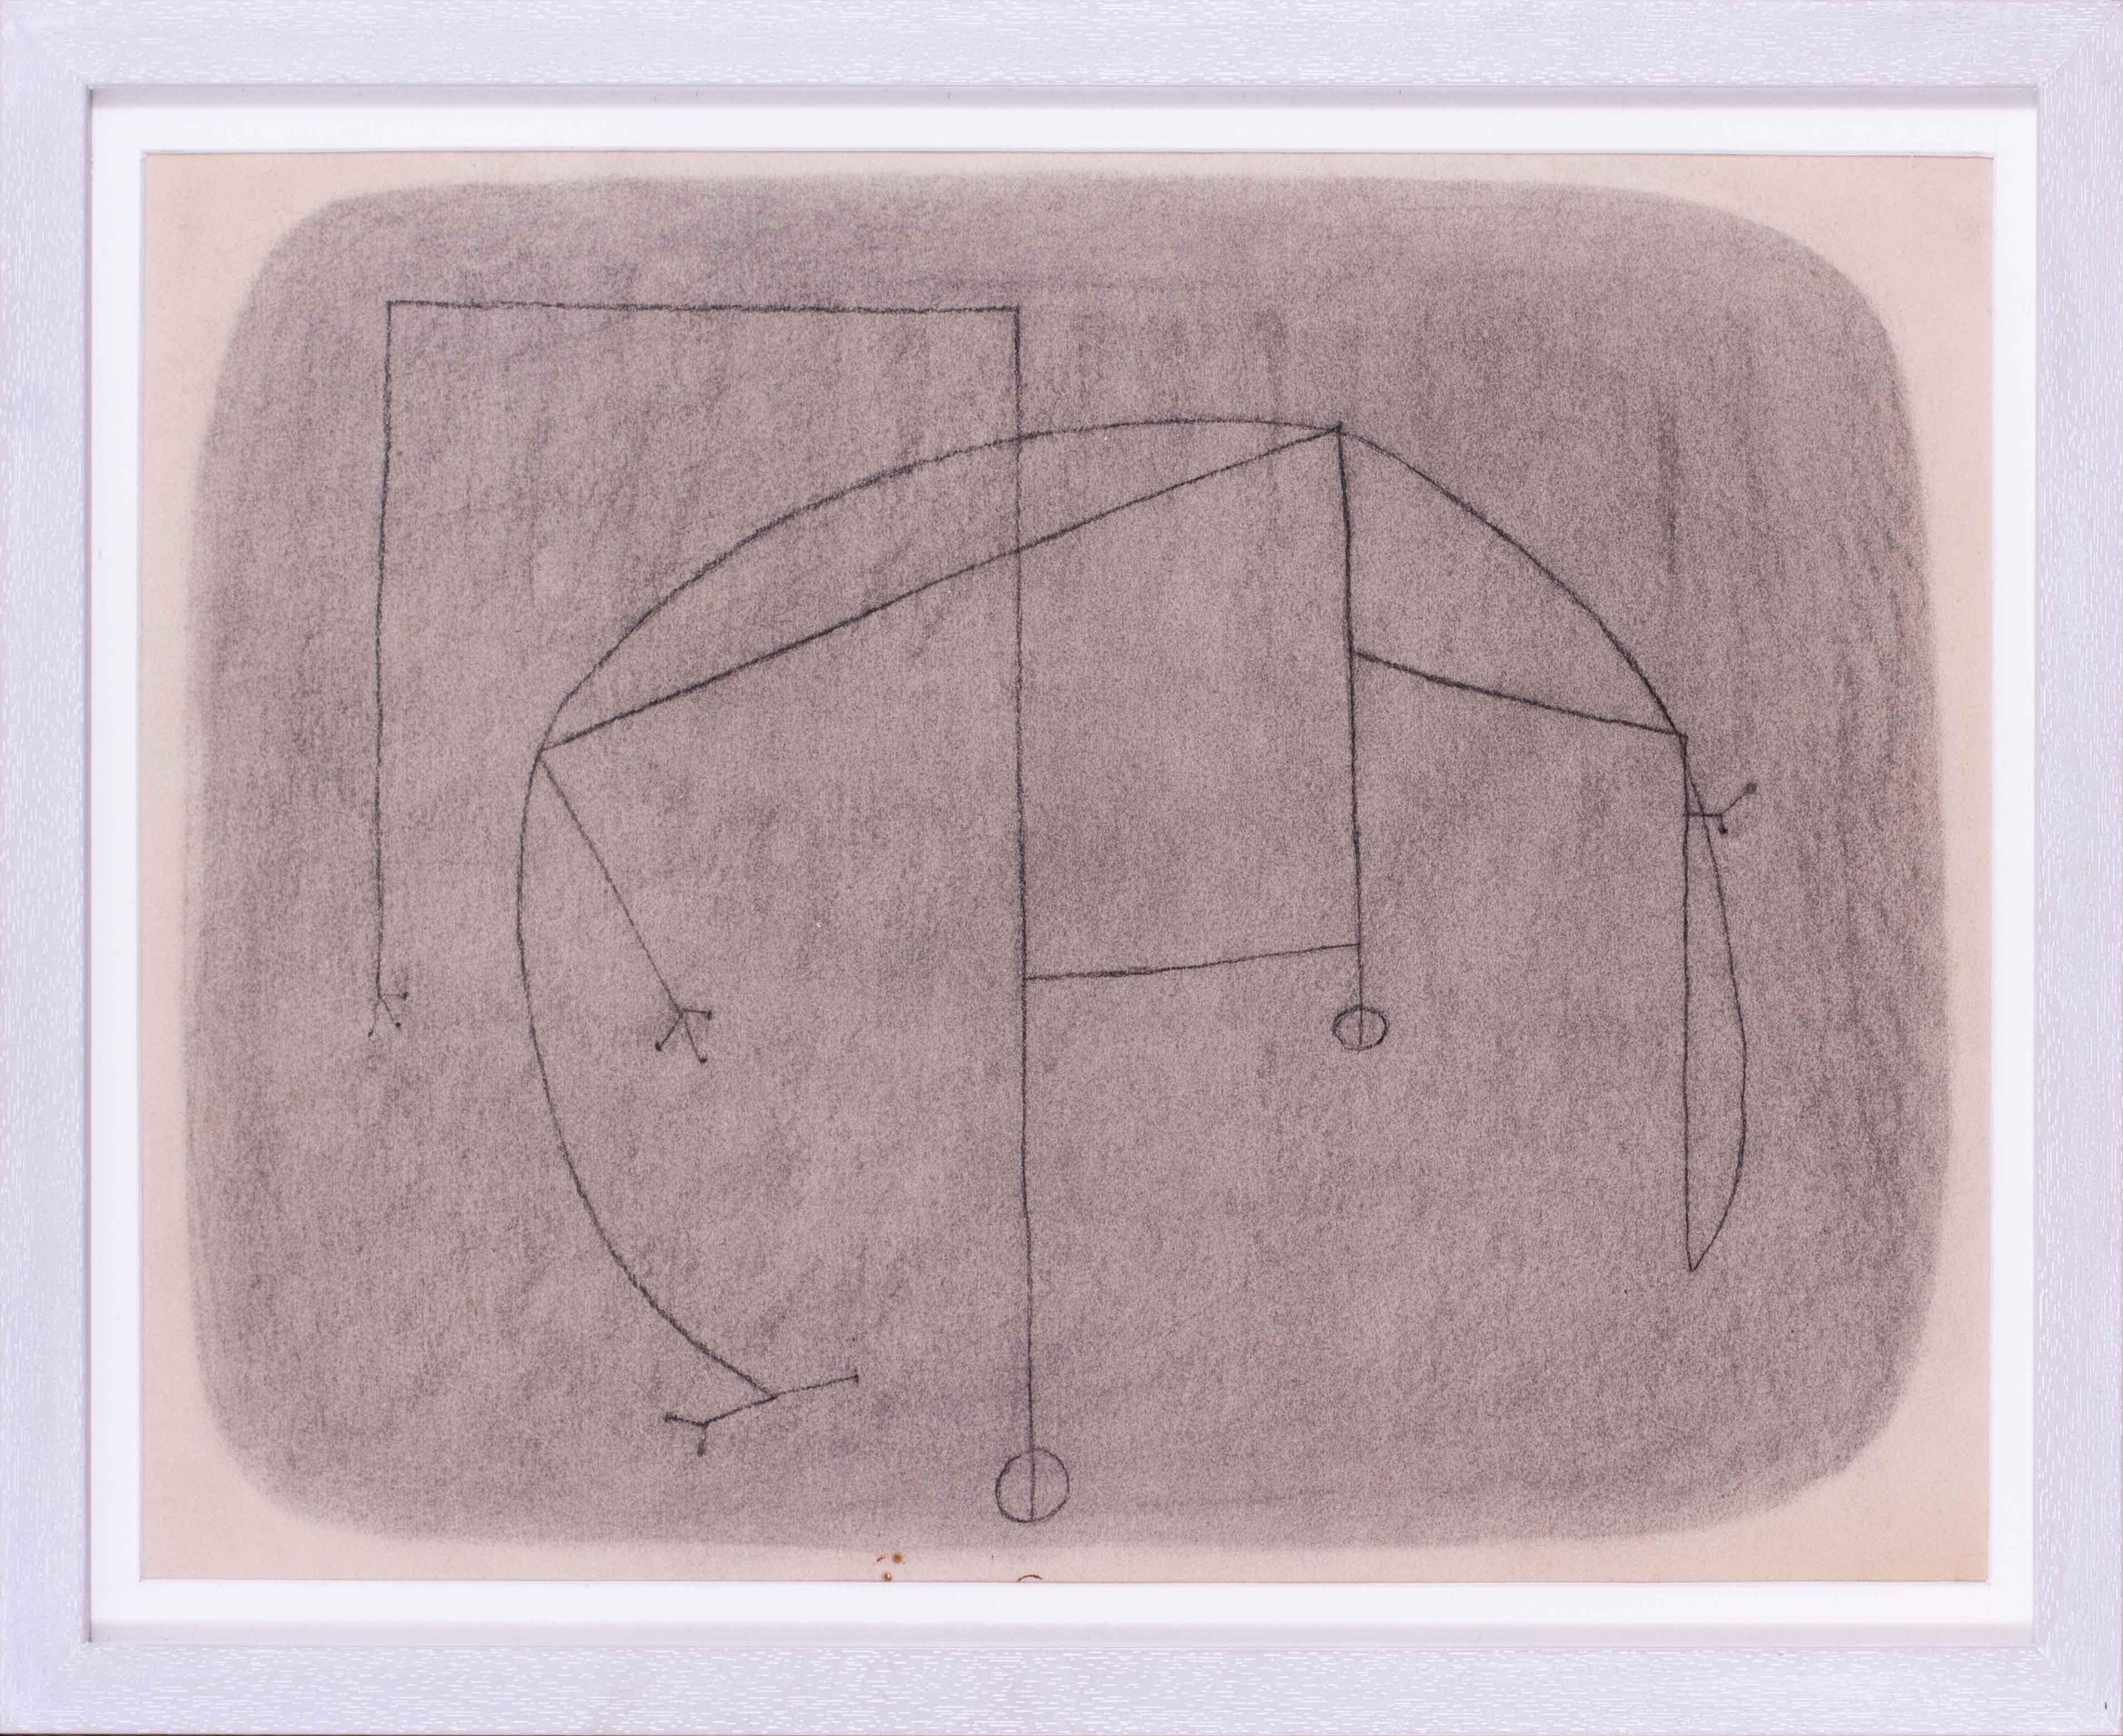 Modern British drawing of abstract forms by Arthur Berridge, 1950